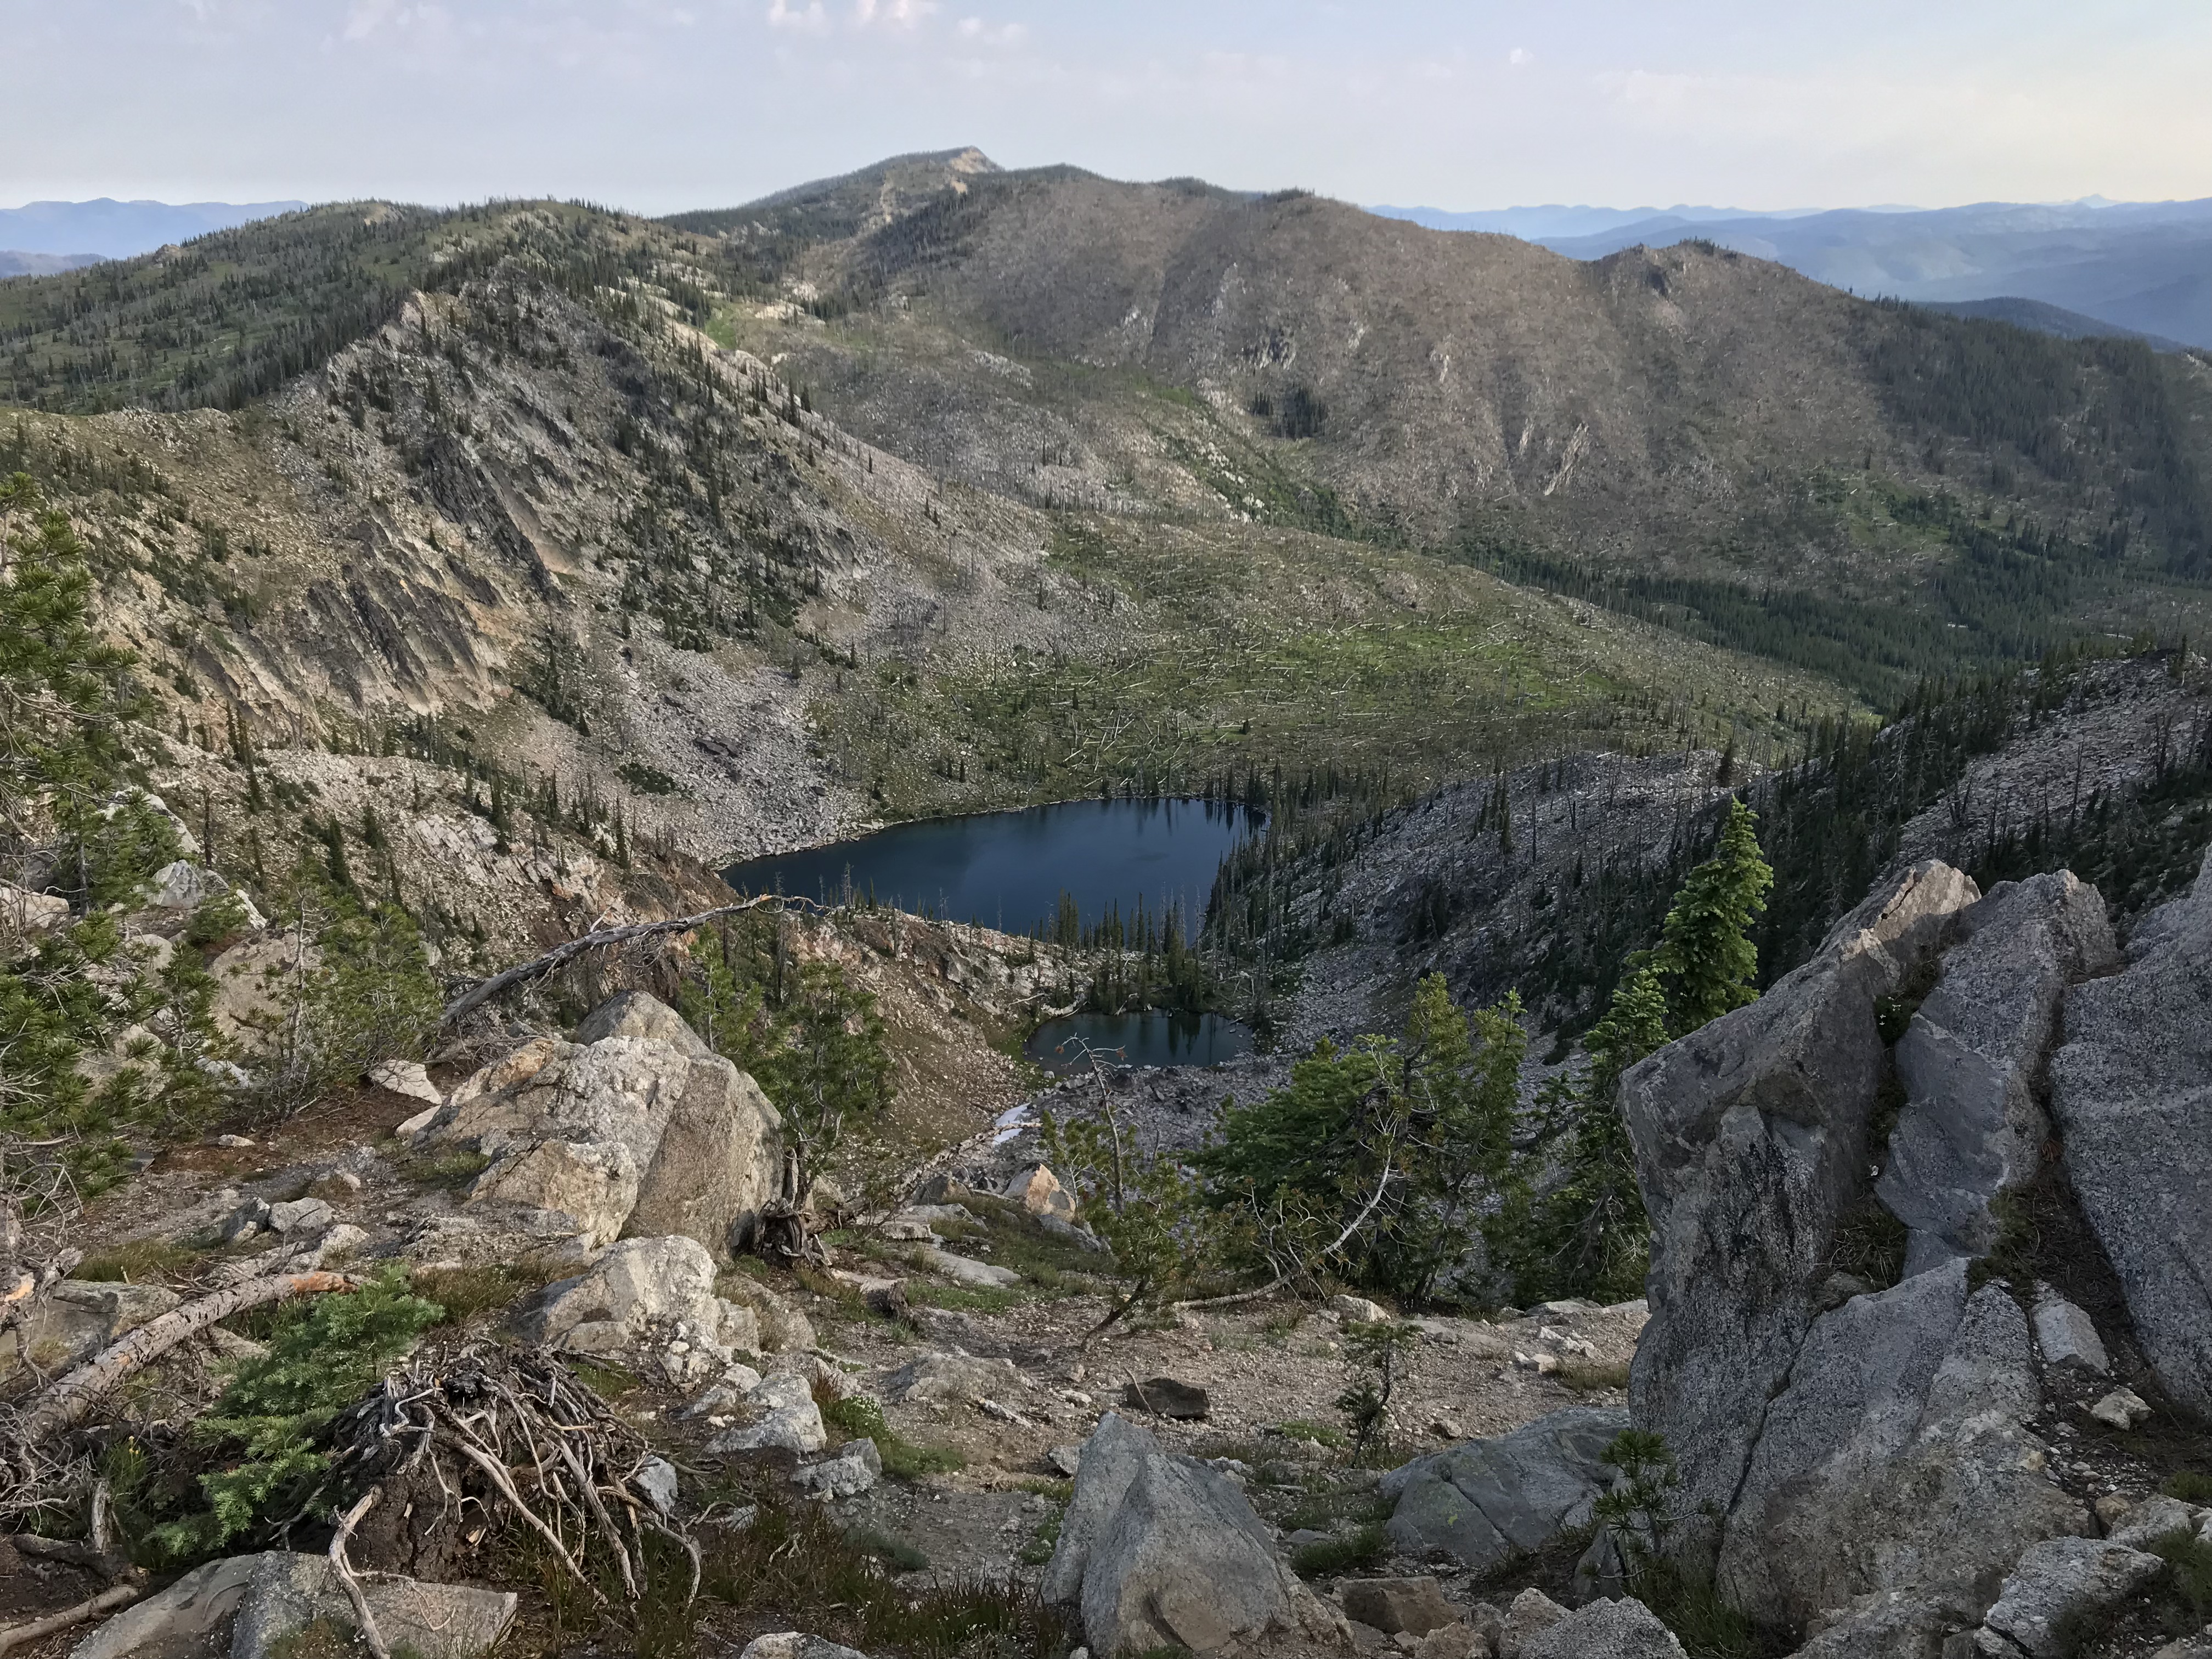 Josephine Lake from the summit with Bear Pete Mountain in the background.